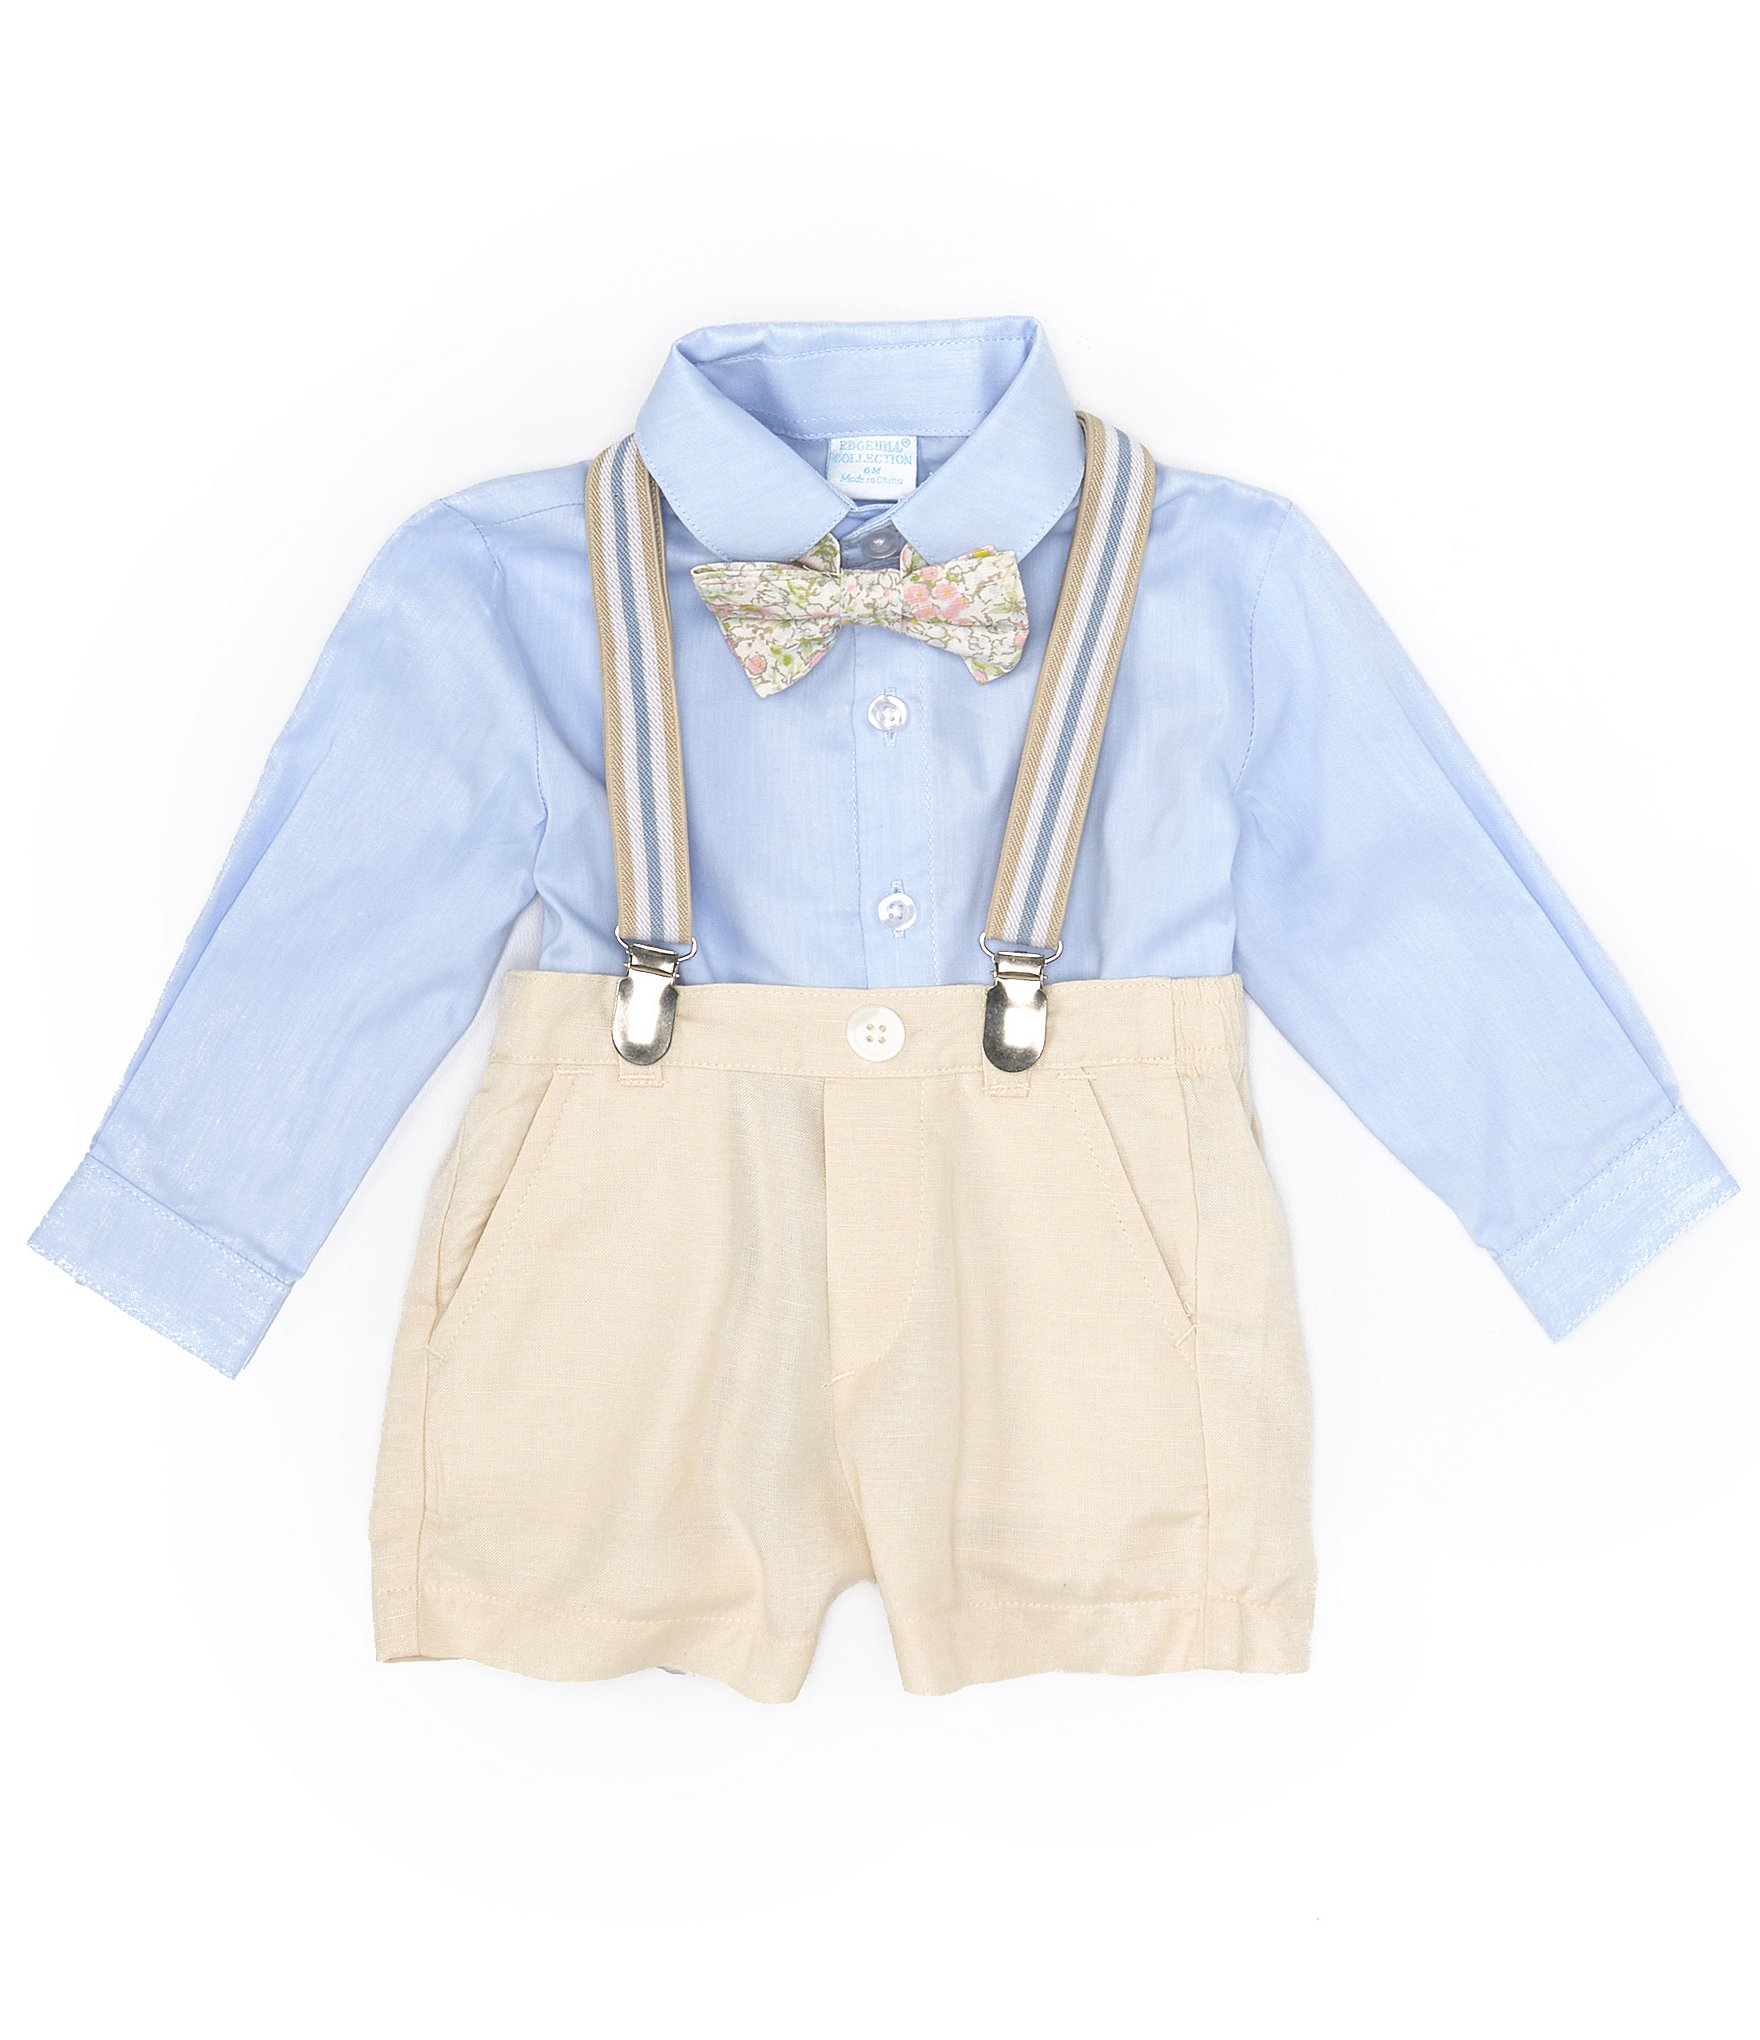 Natural Linen Shorts for Kids /childrens' Shorts With Suspenders